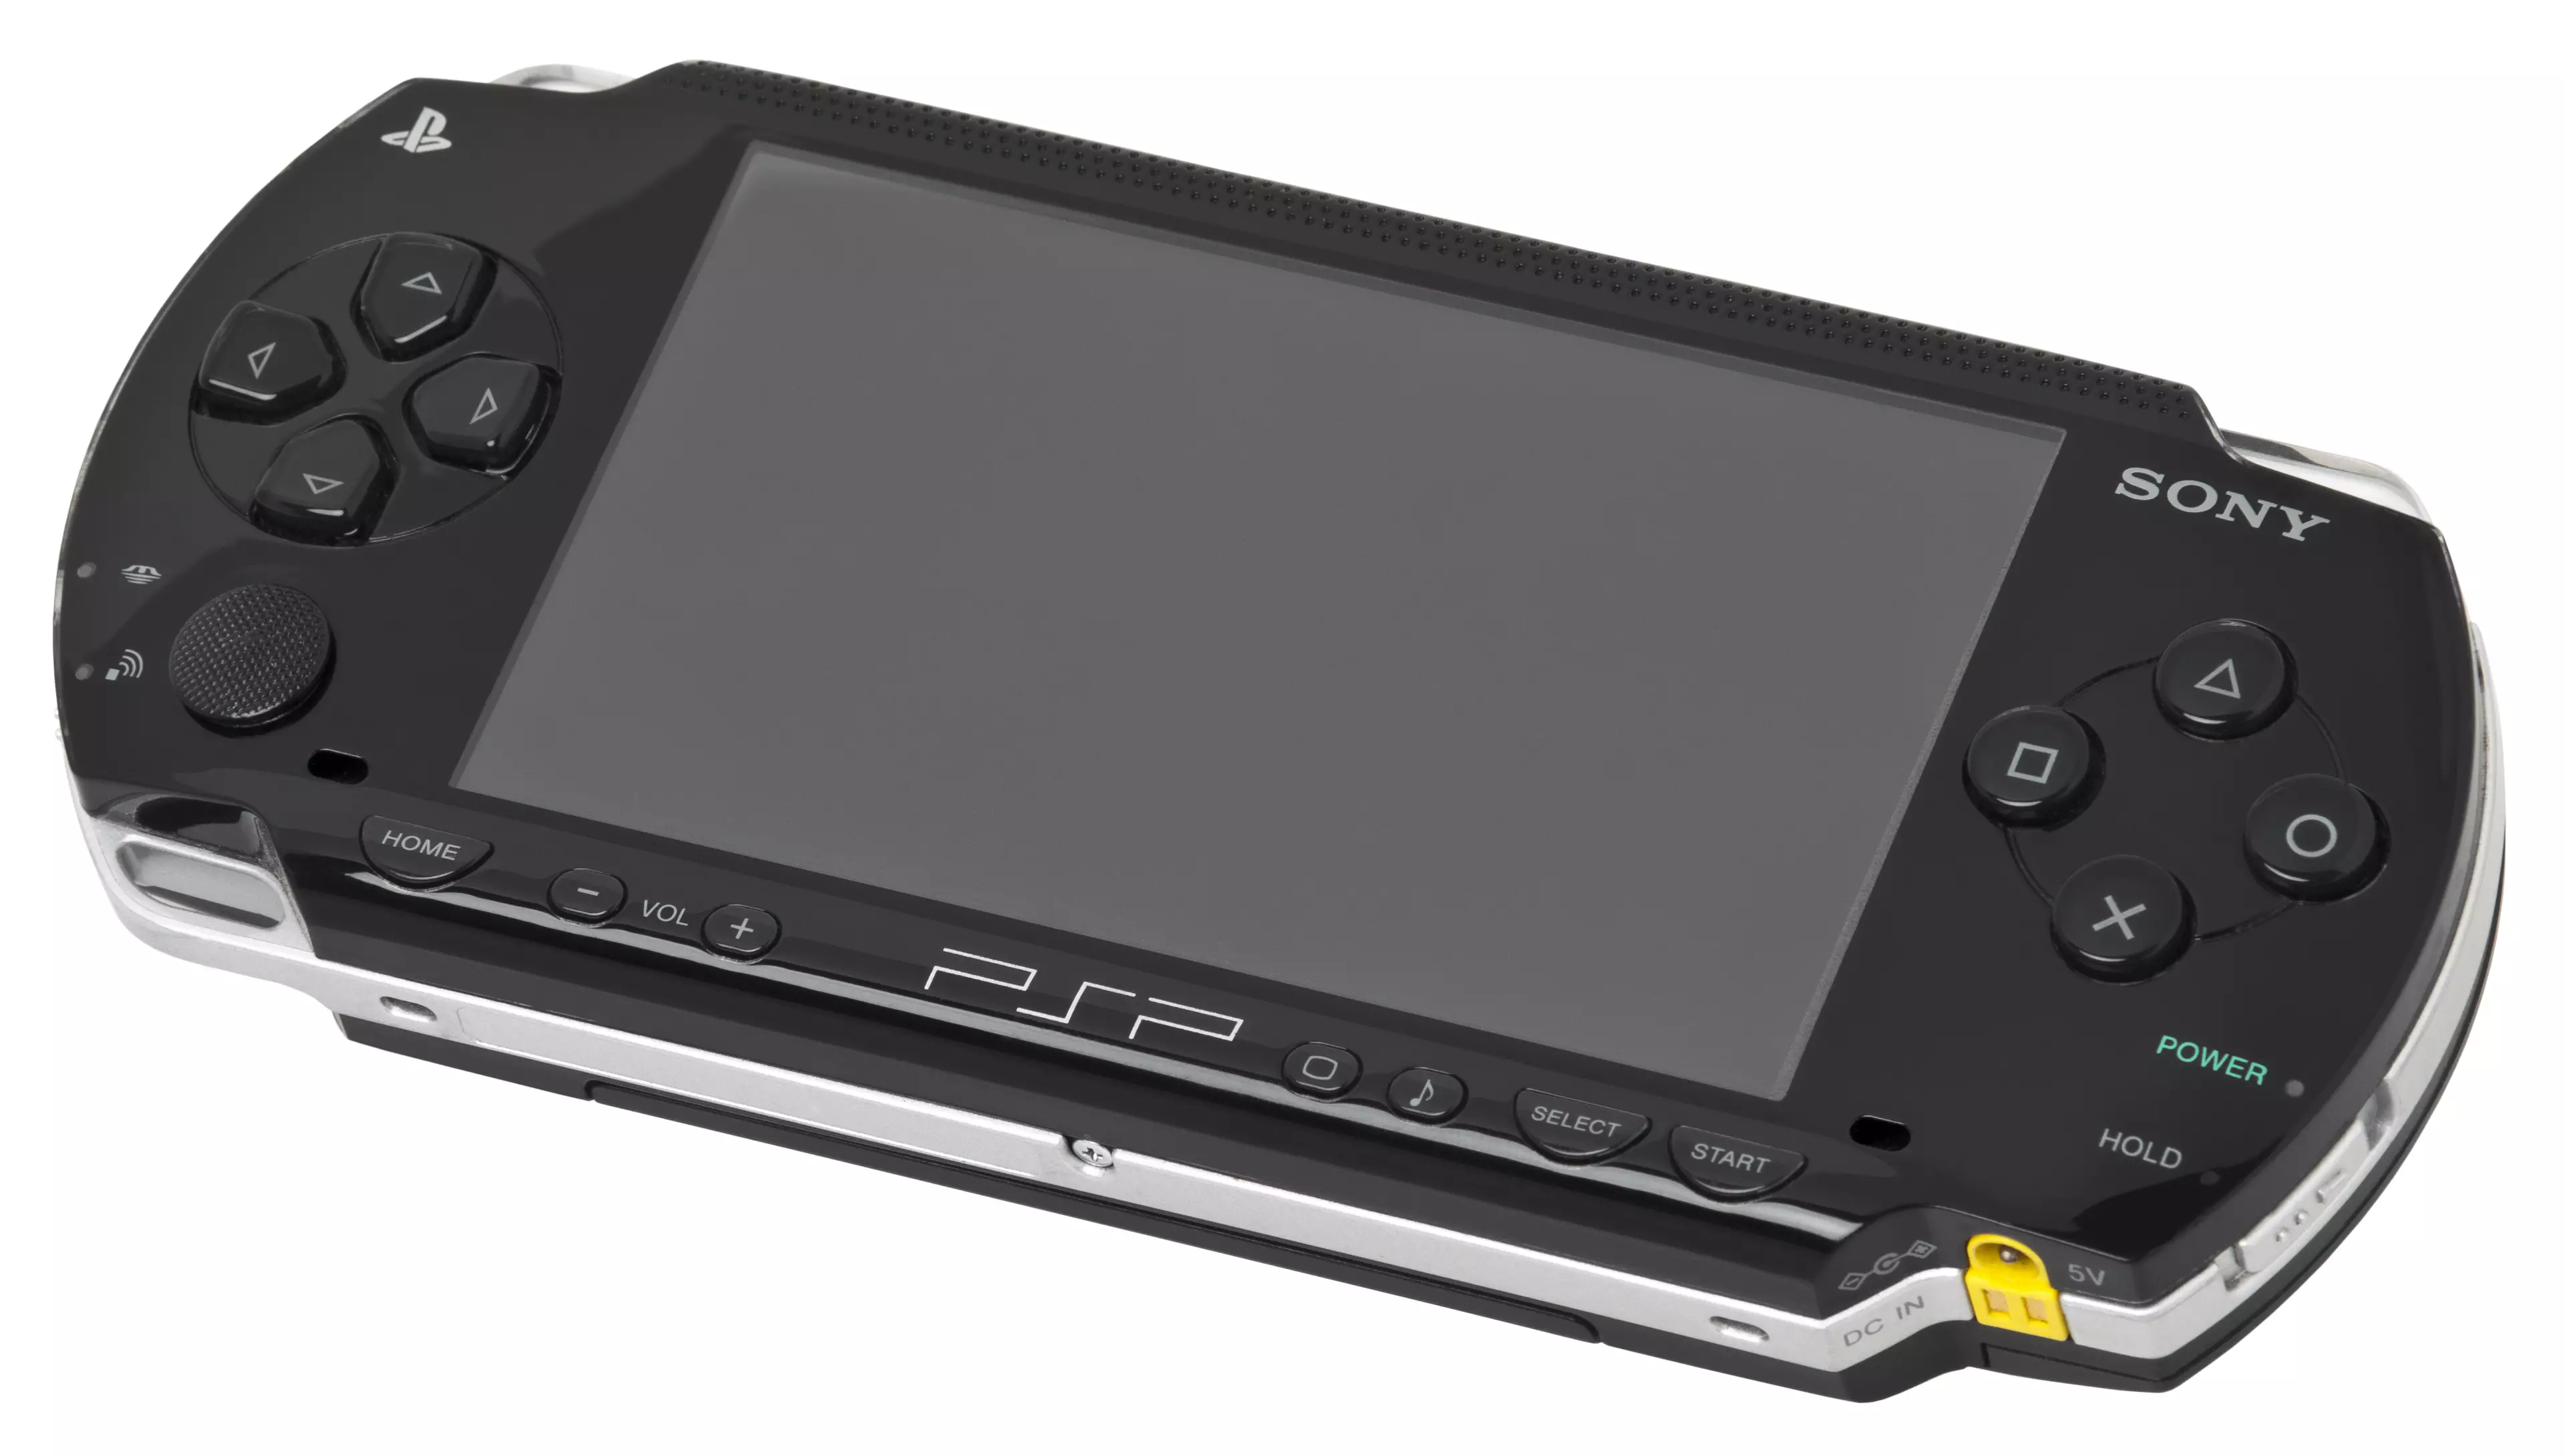 The PSP-1000 model of PlayStation Portable /